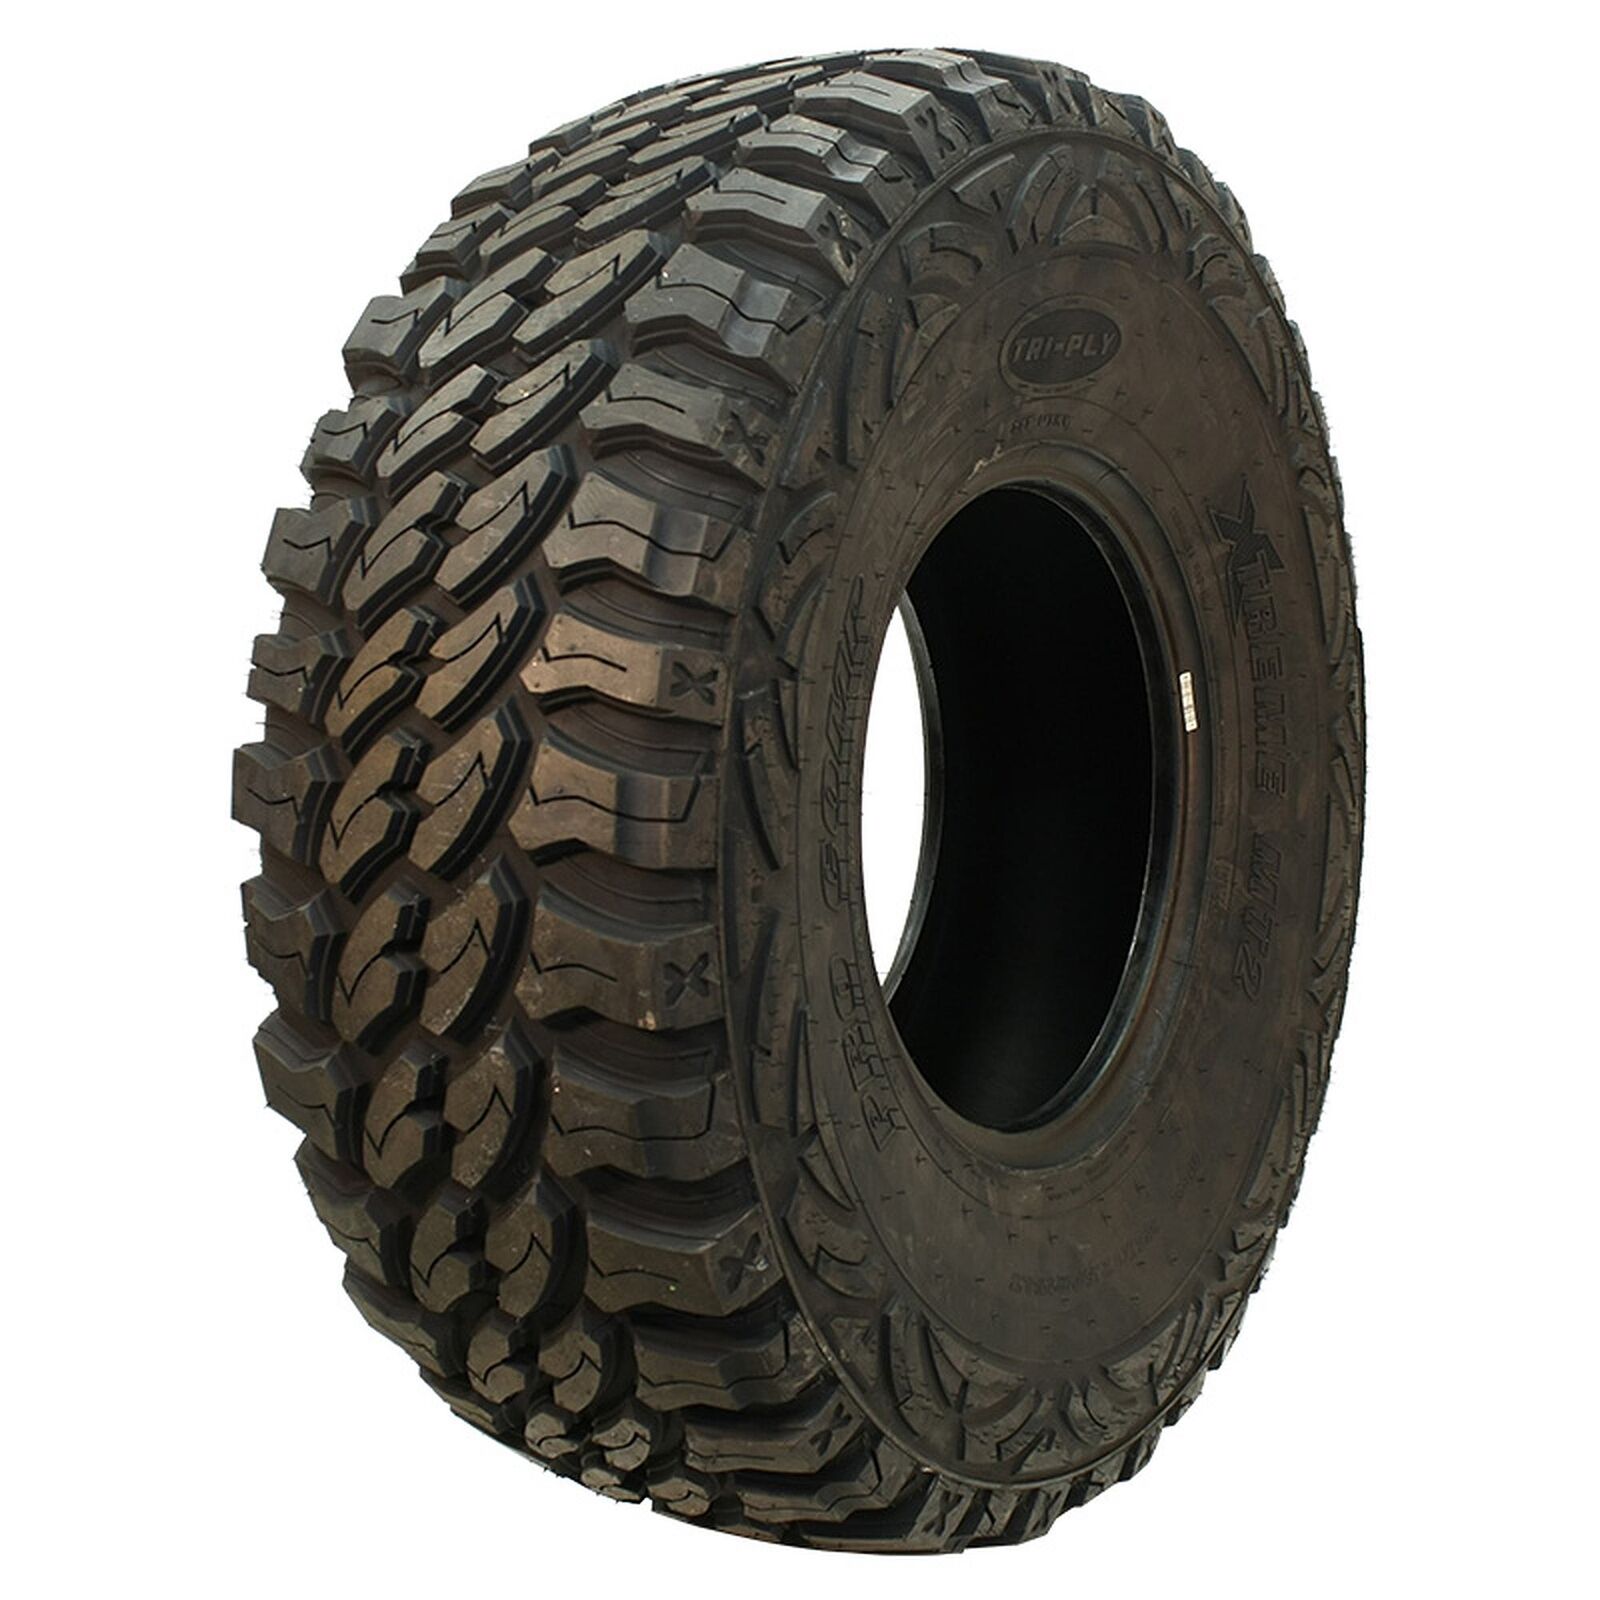 1 New Pro Comp Xtreme M/t 2 Radial  - Lt37x12.50r20 Tires 37125020 37 12.50 20